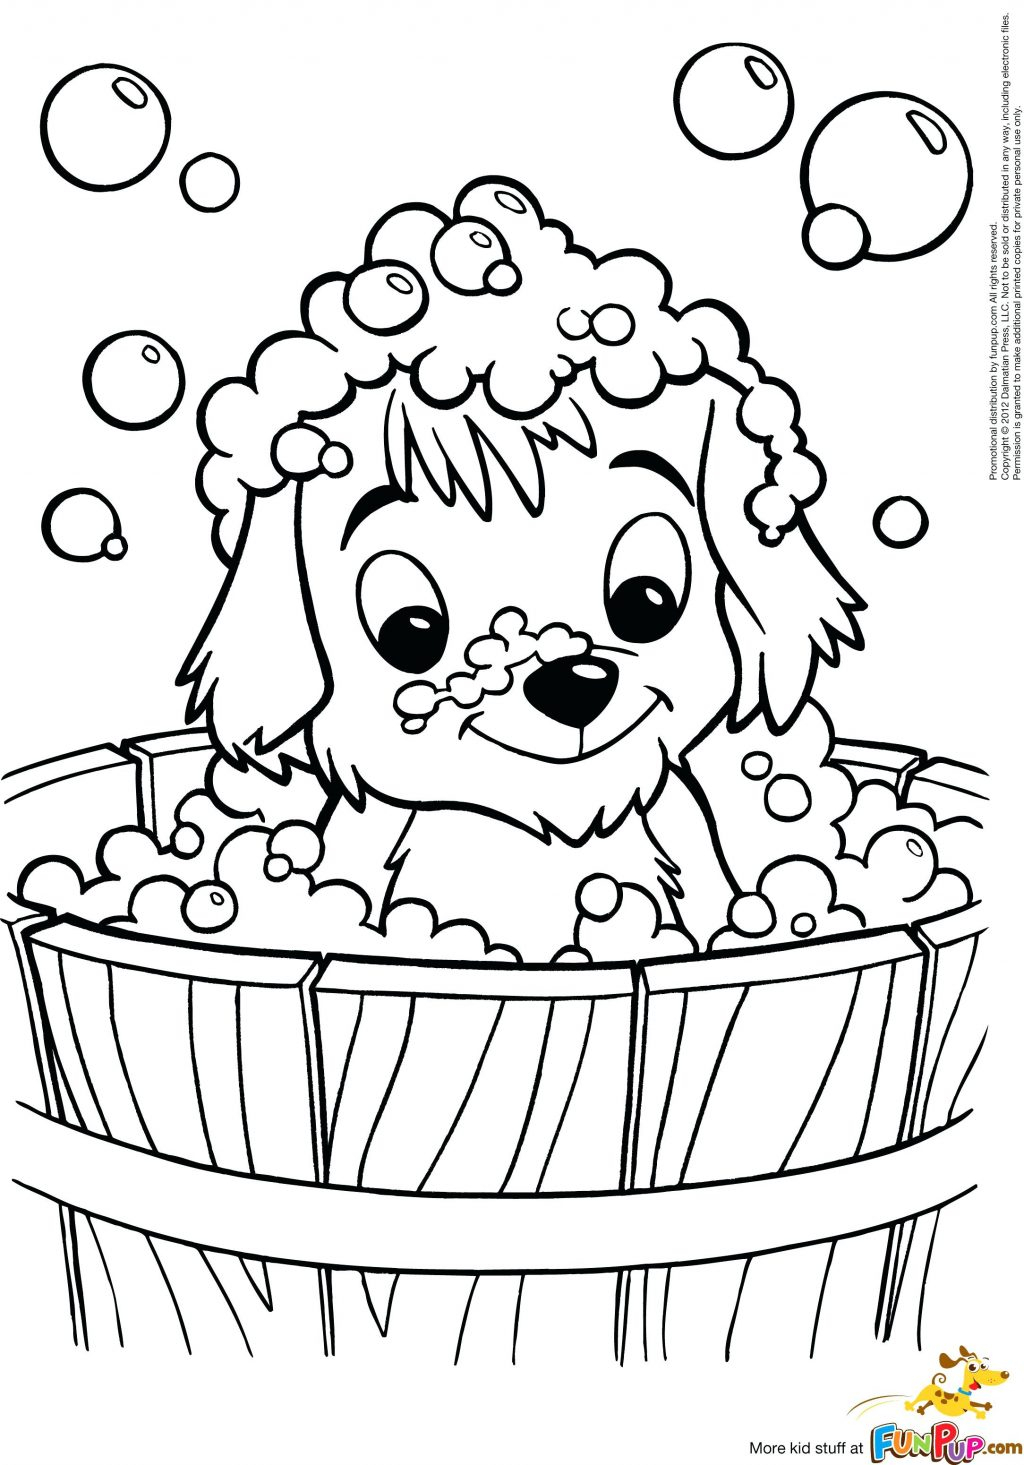 Little Puppy Coloring Pages Coloring Page Best Kitten And Puppy Coloring Pages For Kids Cute